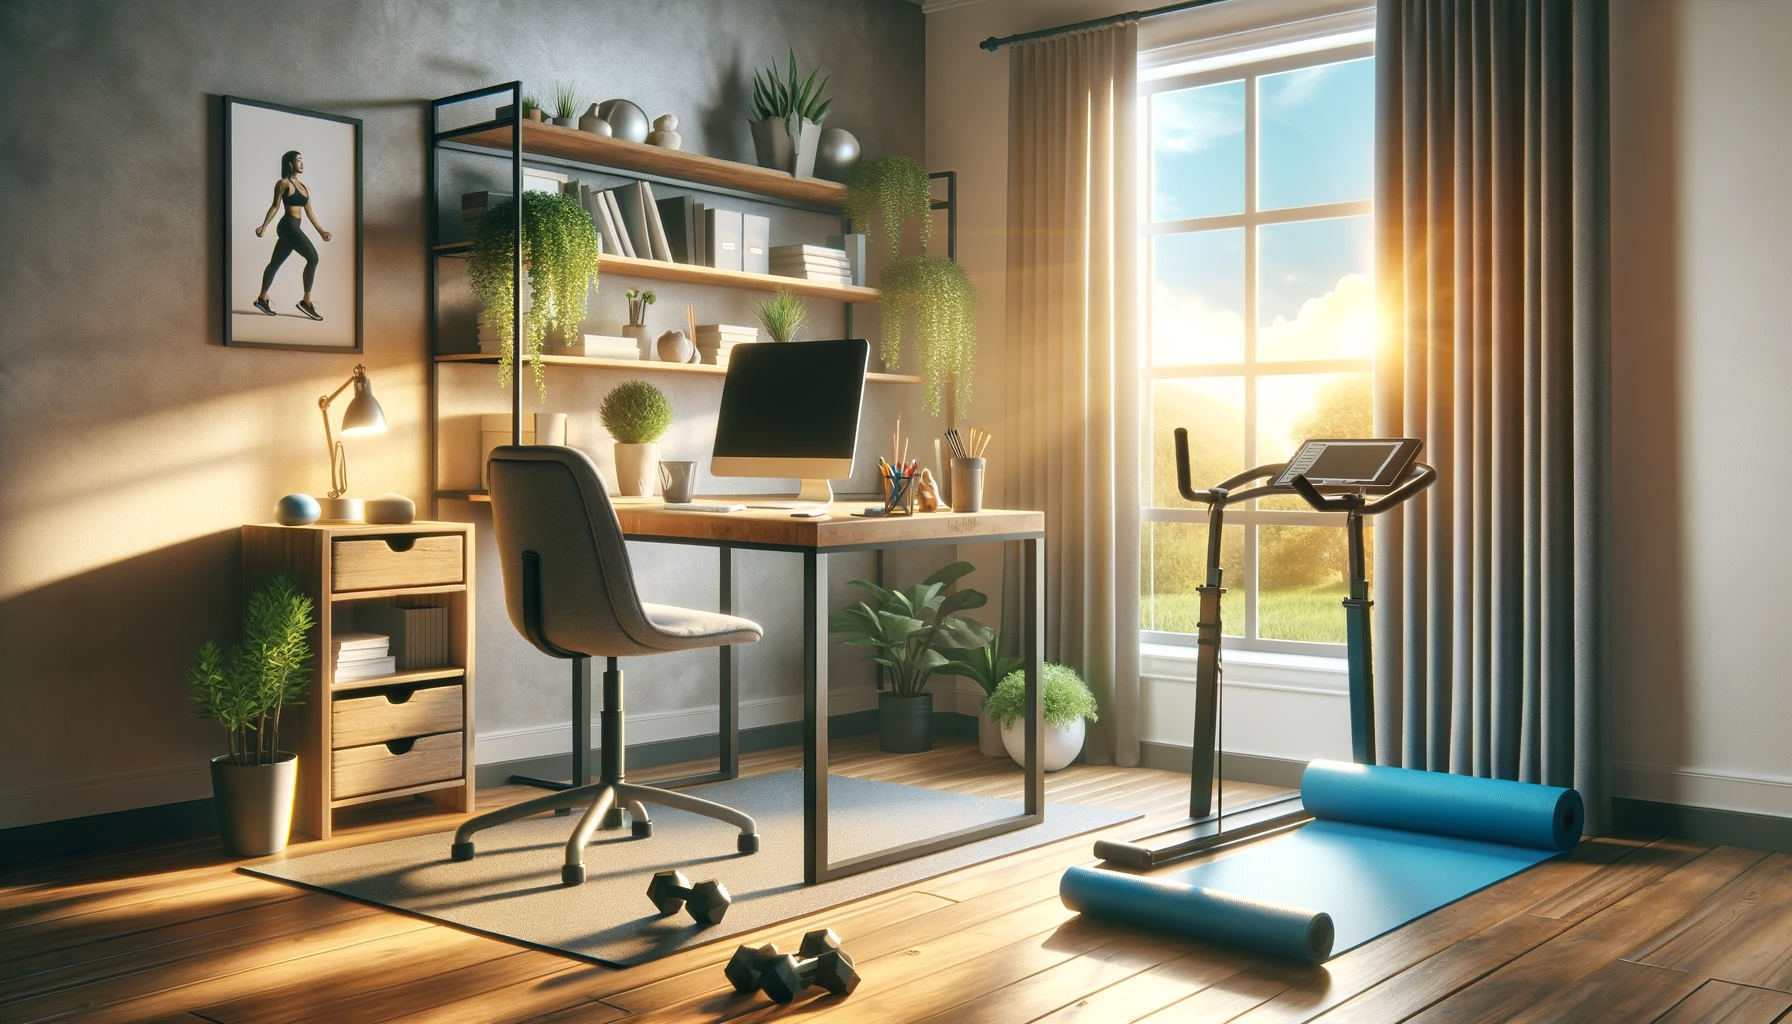 How to Stay Physically Active While Working from Home":